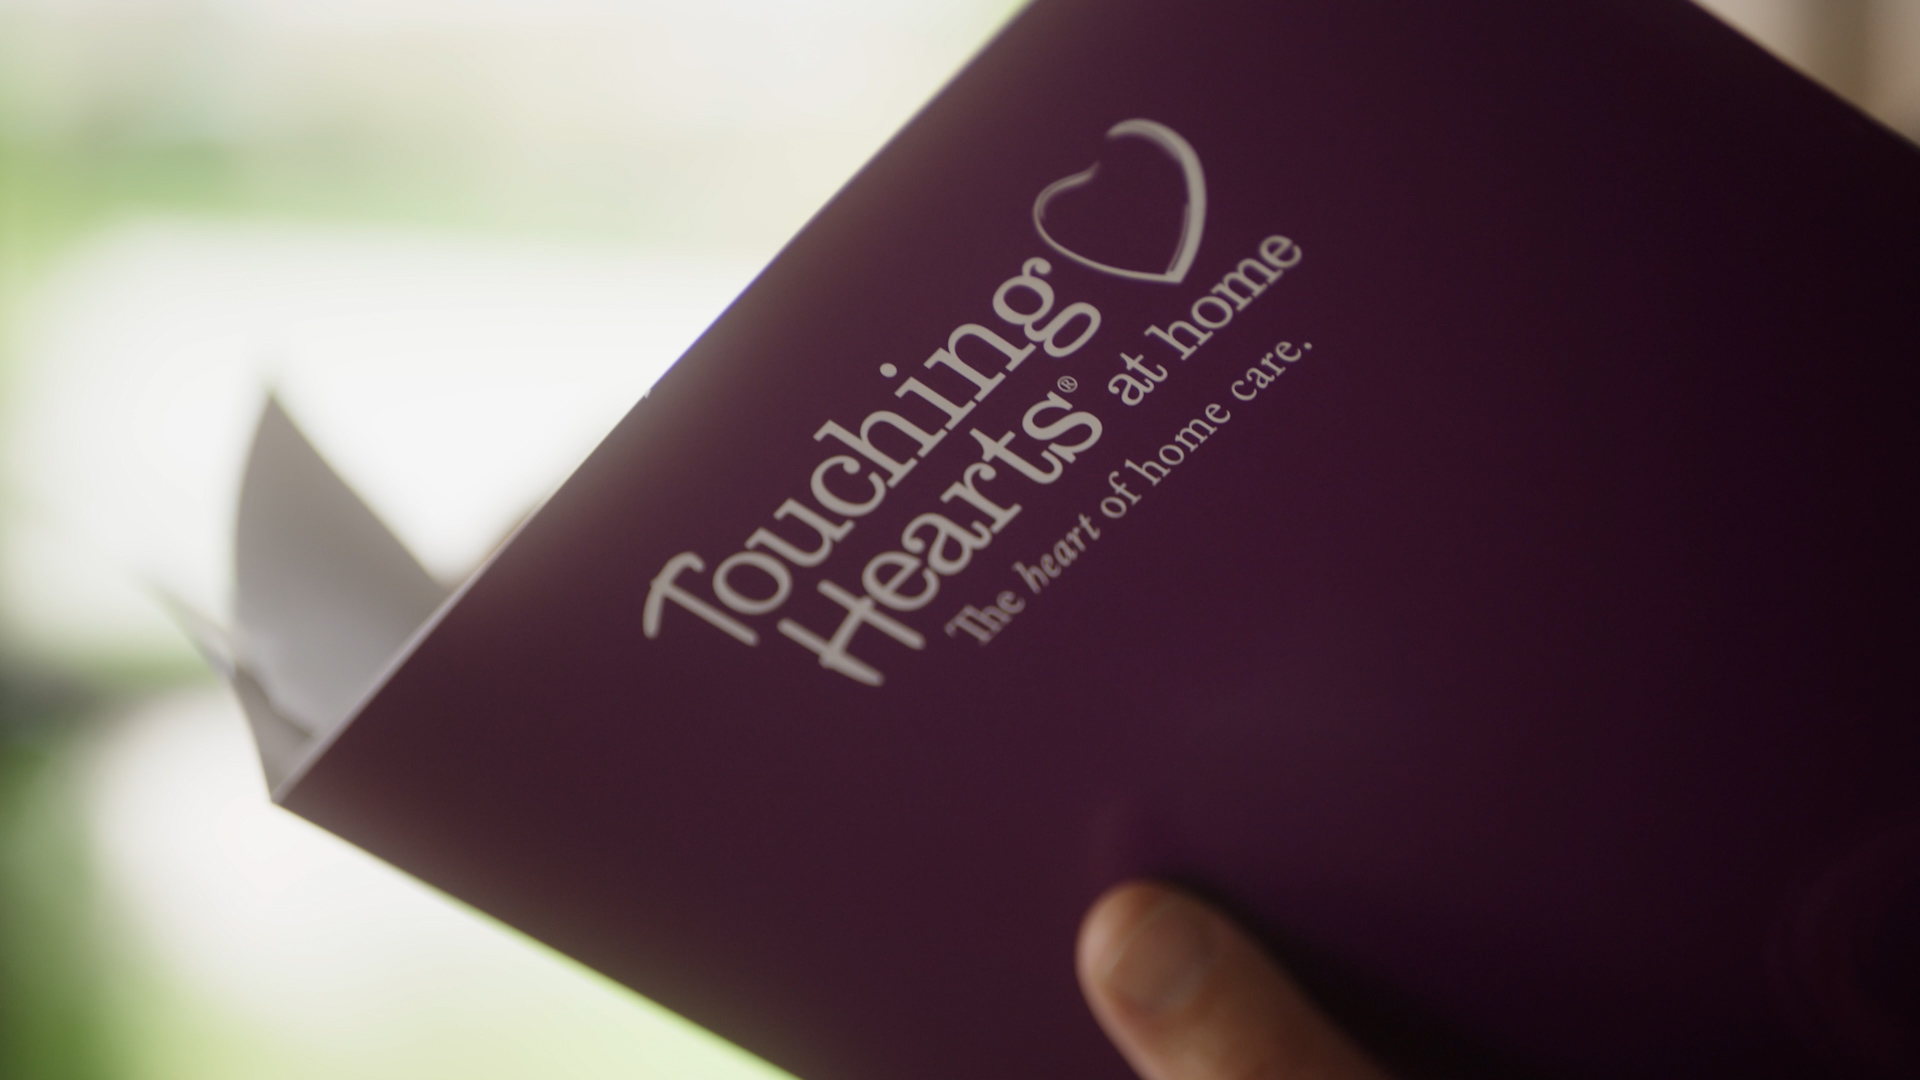 Touching Hearts at Home family-owned business pamphlet